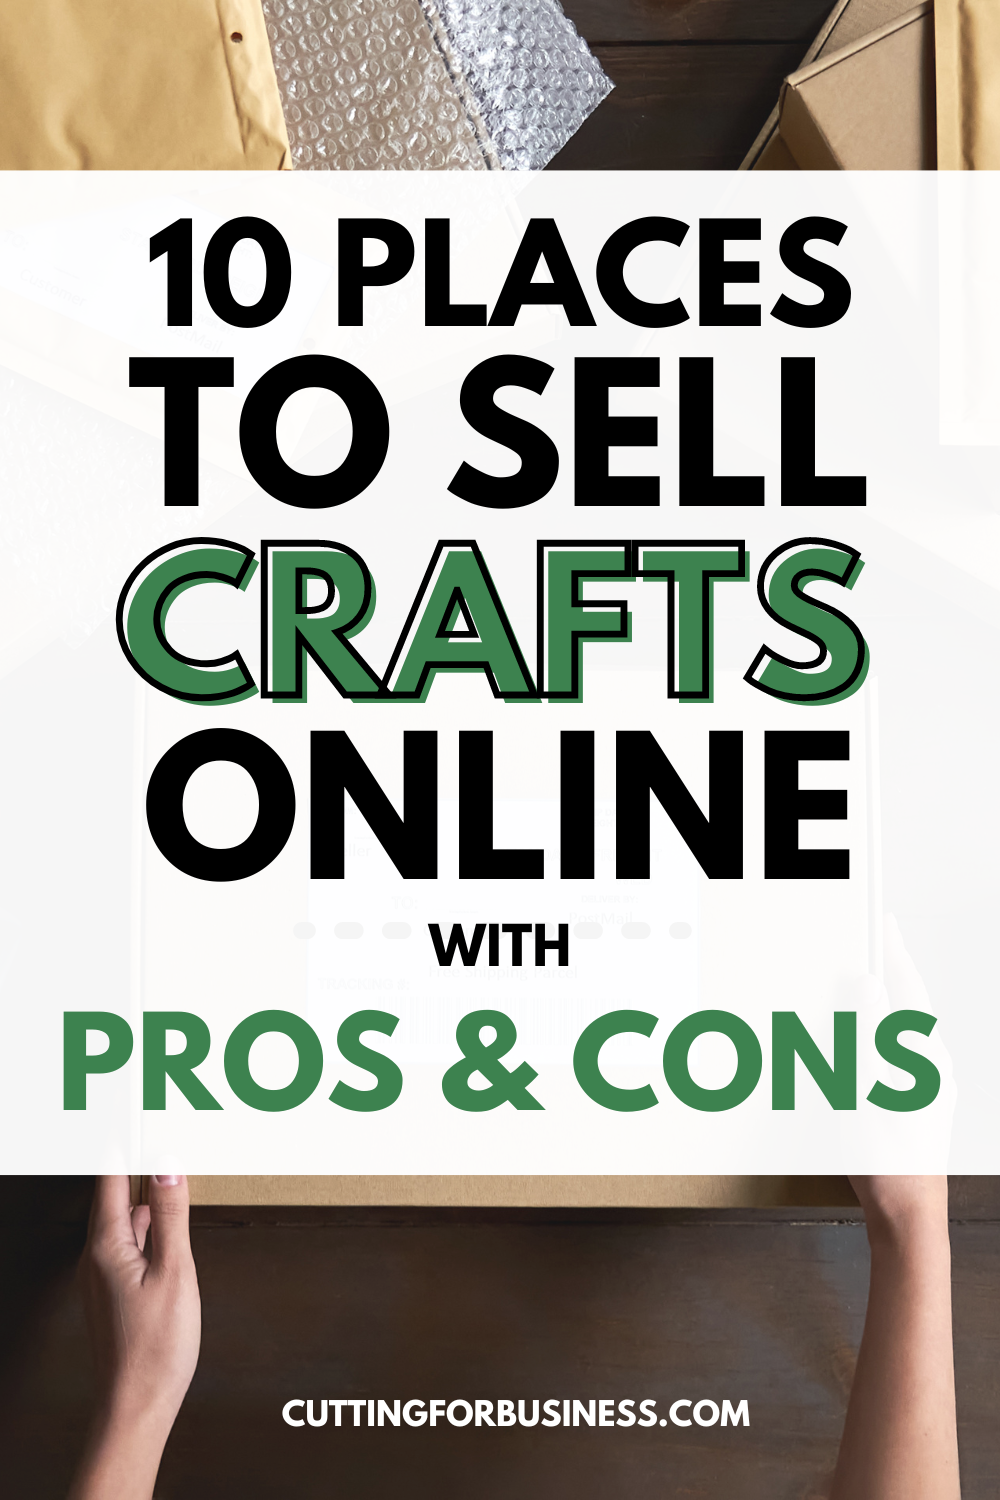 10 Places to Sell Crafts Online with Pros & Cons - cuttingforbusiness.com.